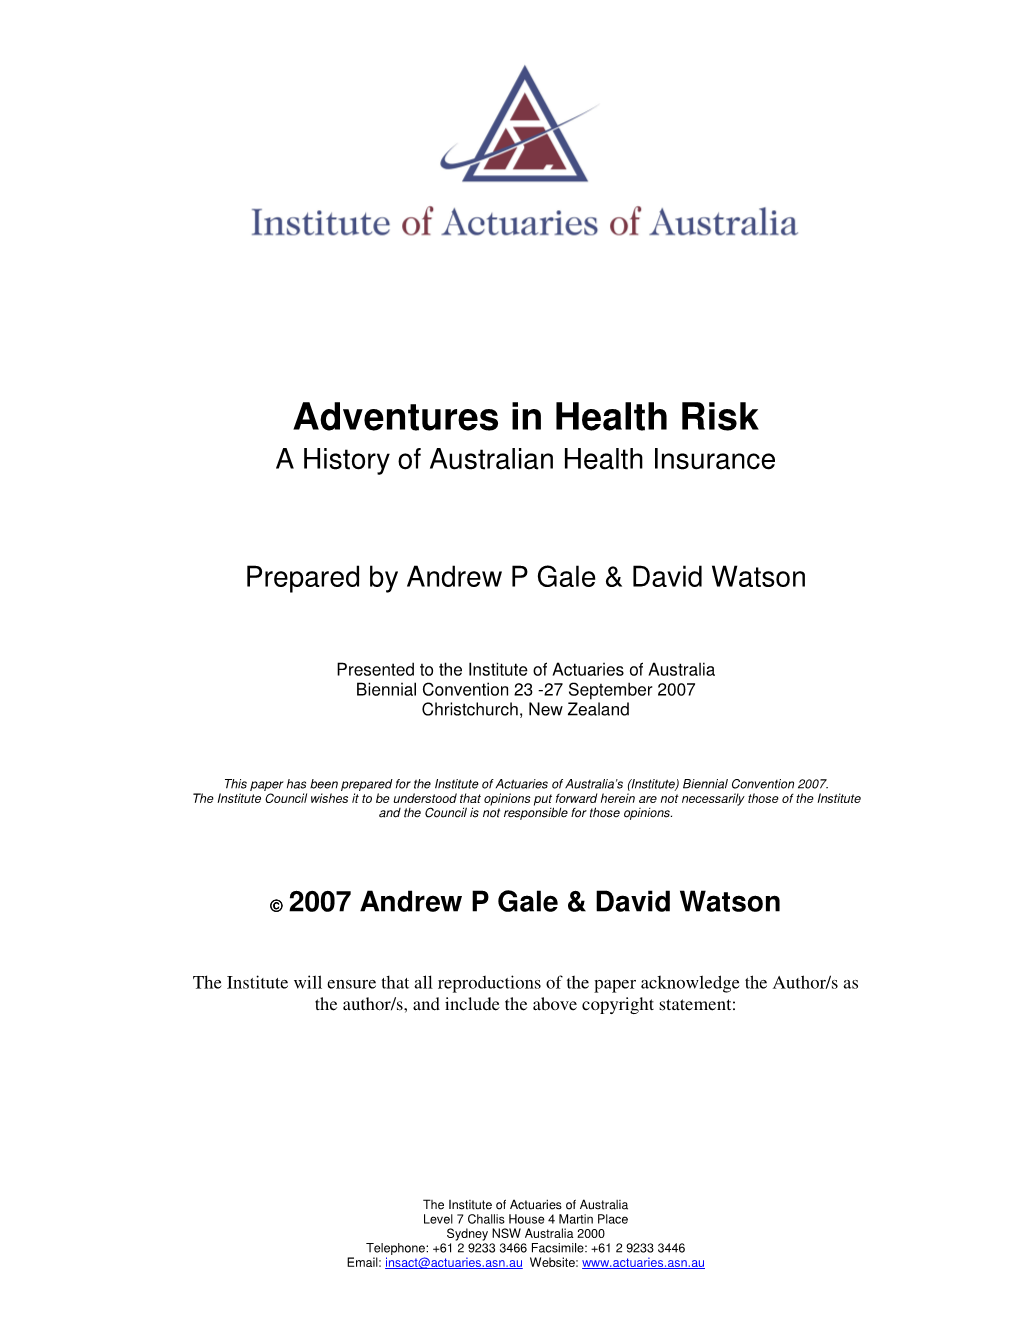 Adventures in Health Risk a History of Australian Health Insurance